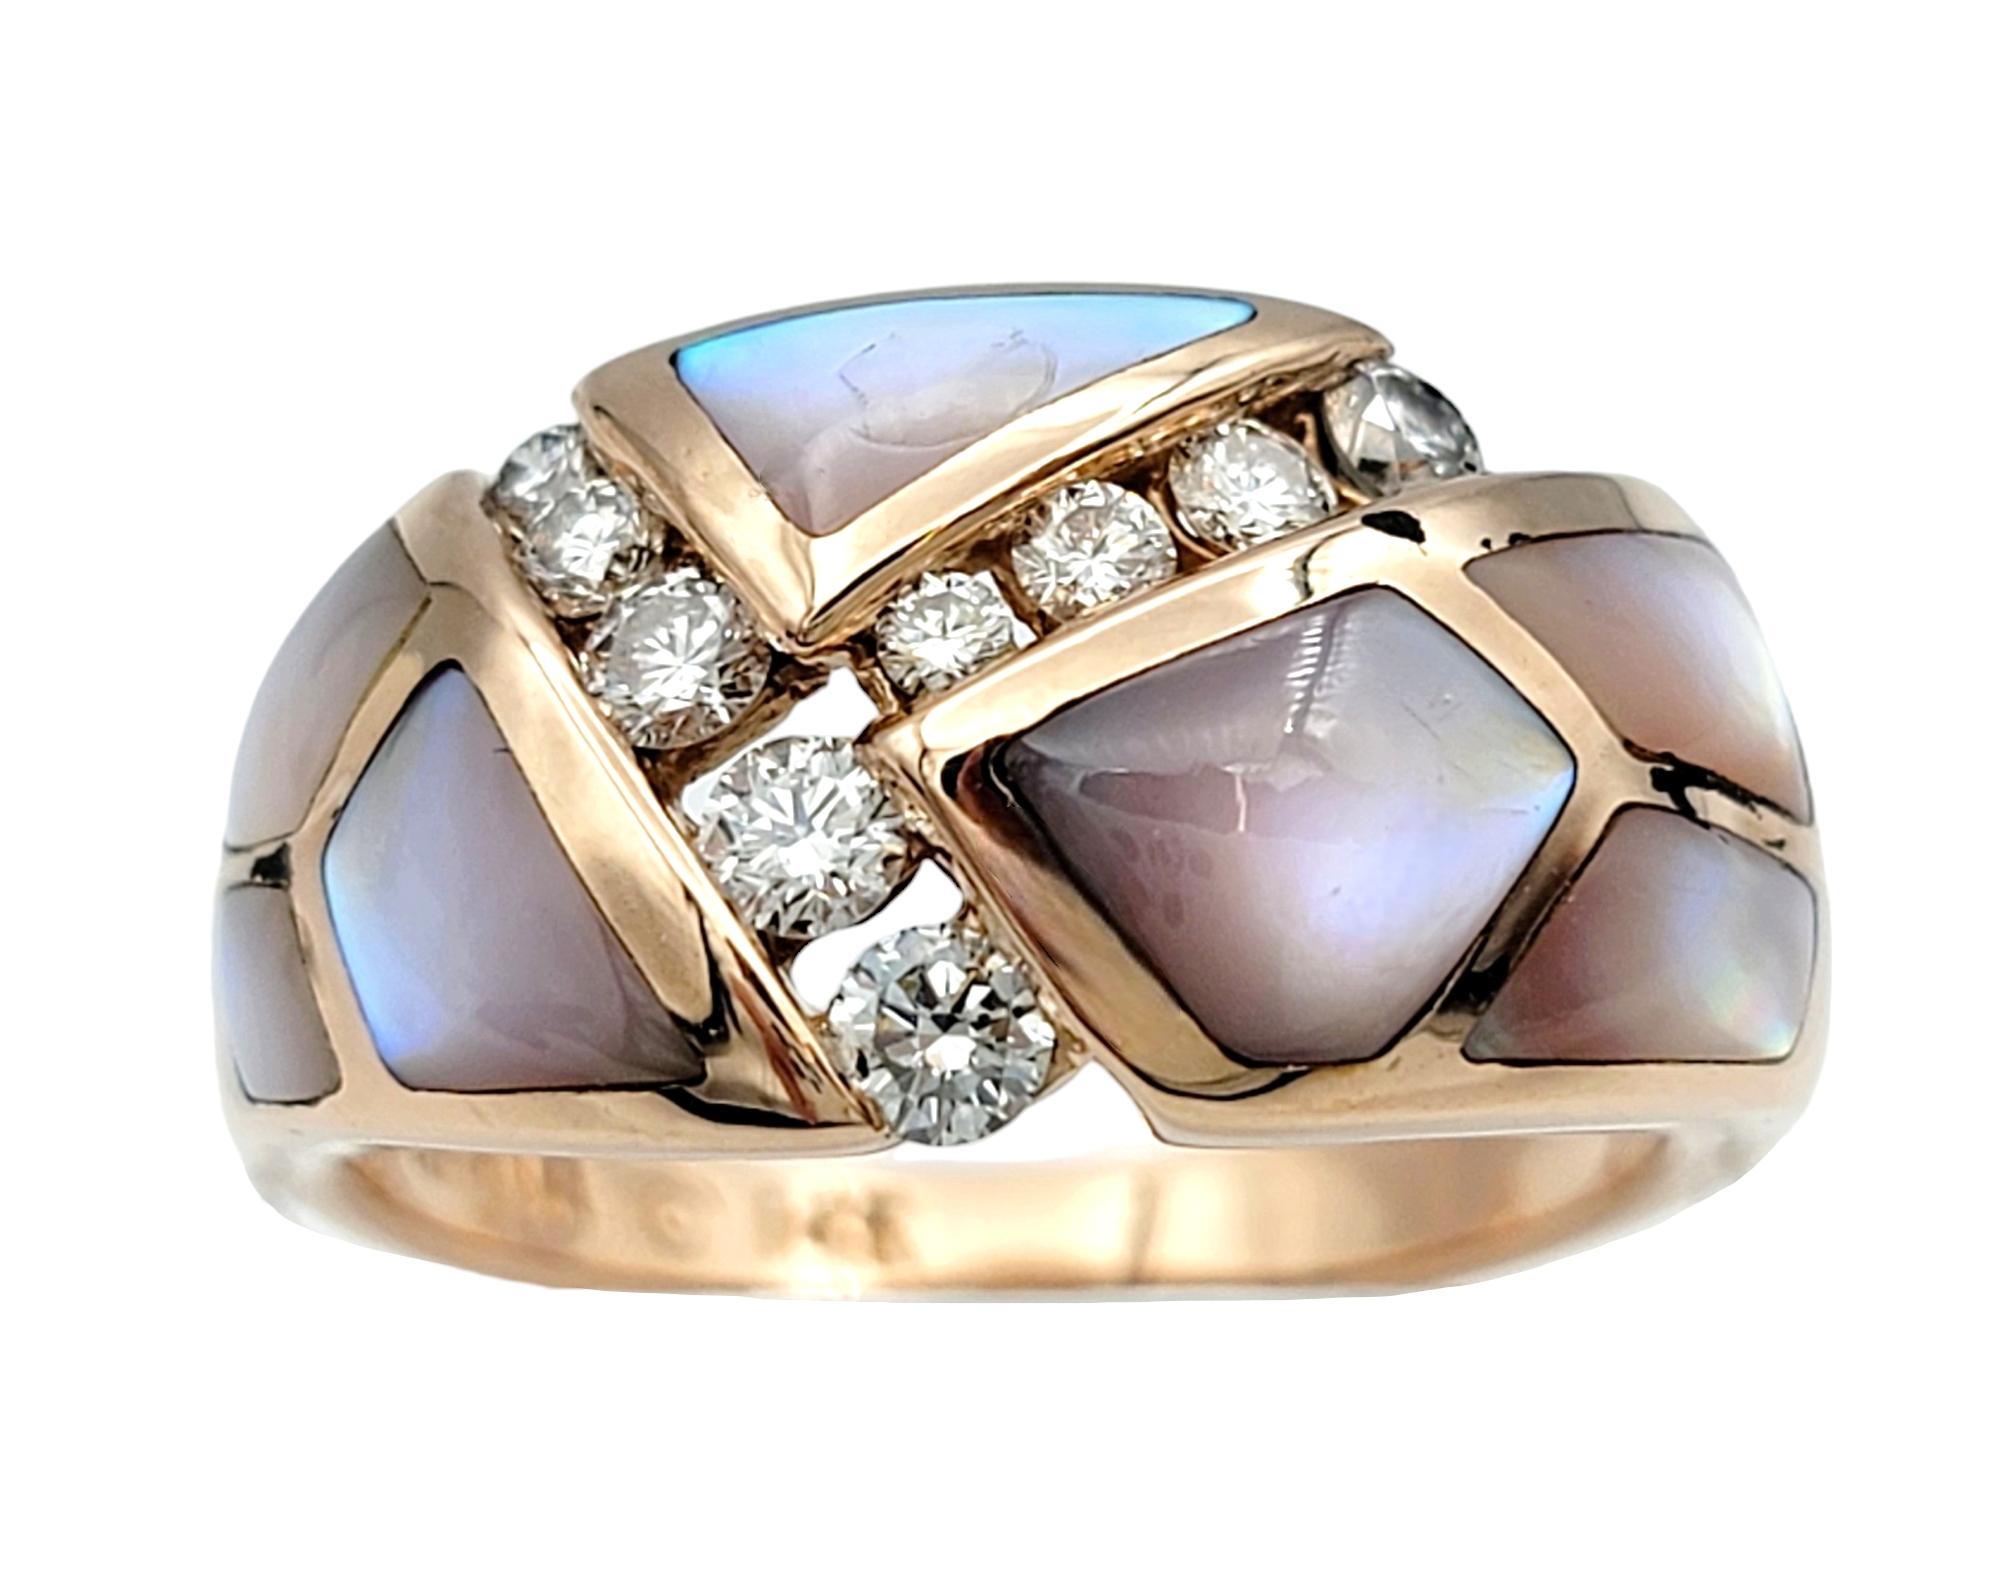 kabana rings mother of pearl